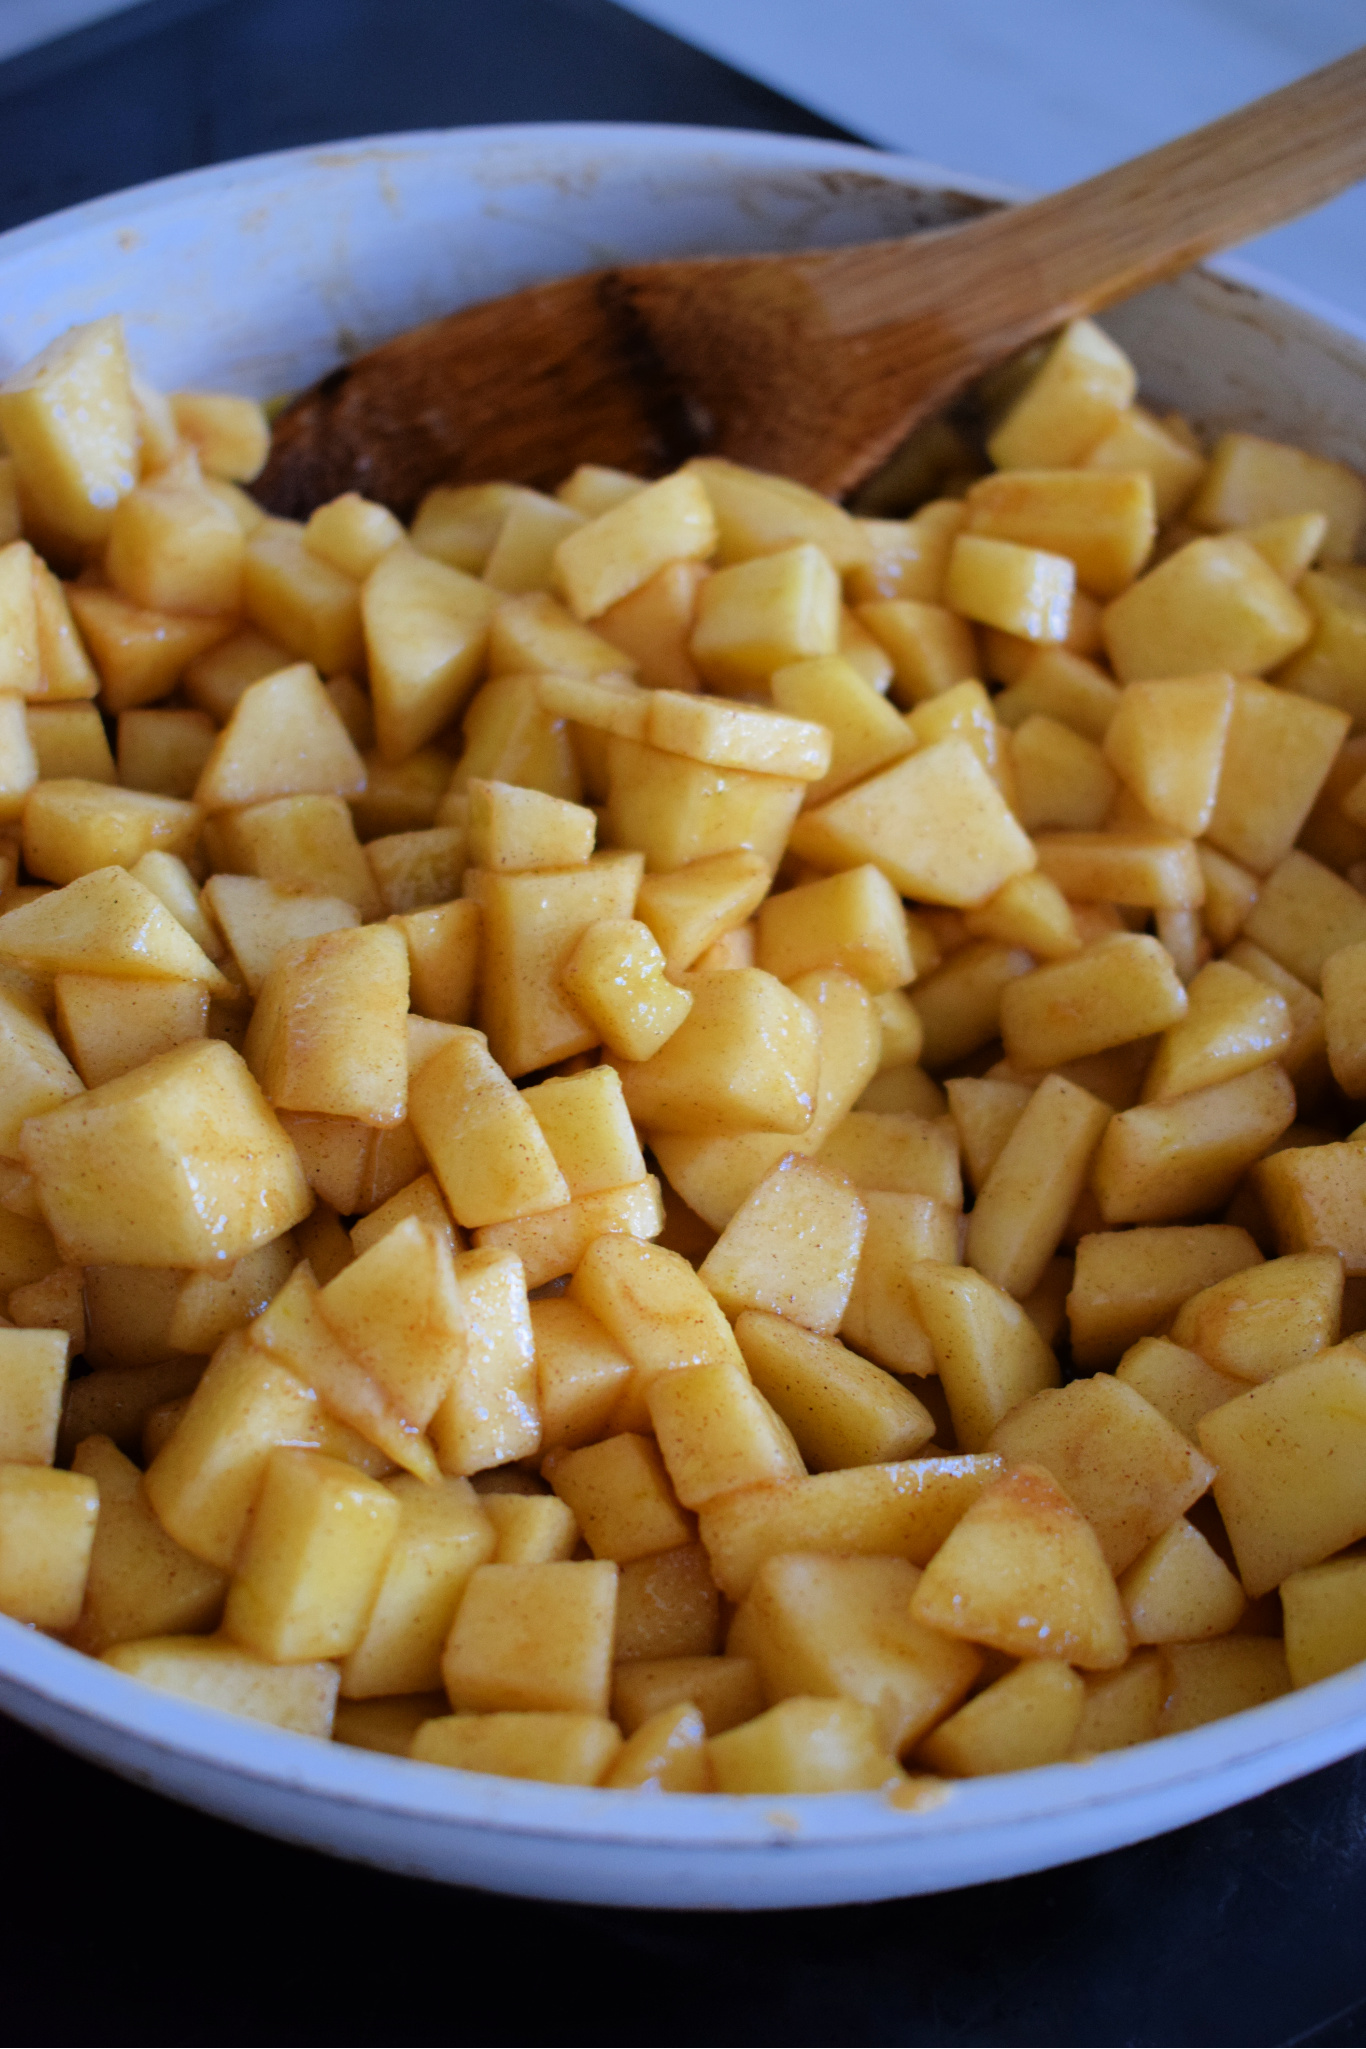 Diced apples in a skillet with brown sugar and butter.